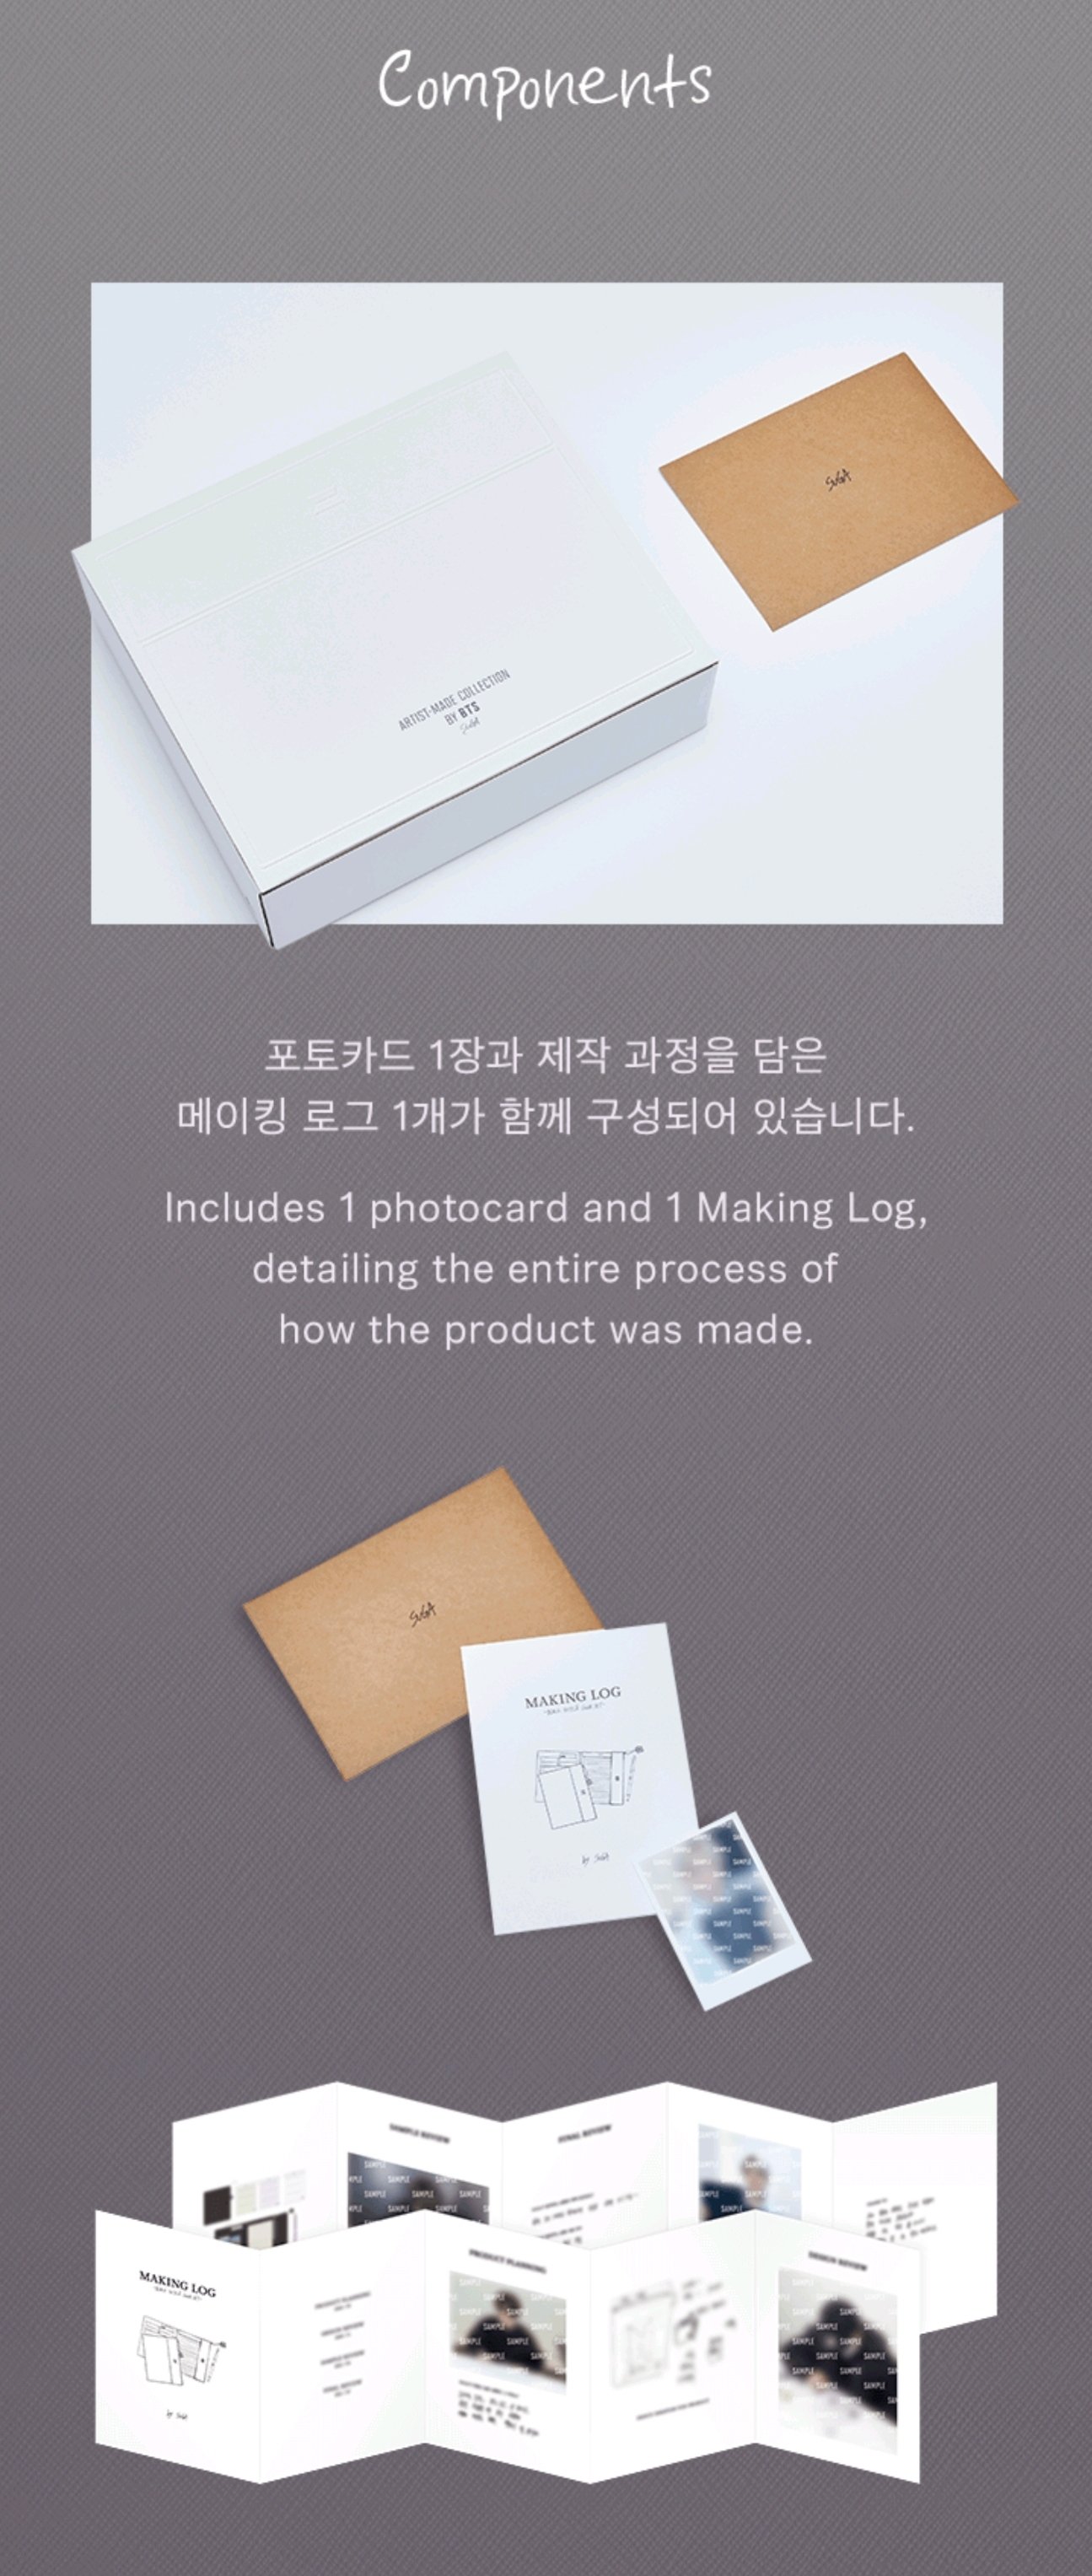 BTS ARTIST-MADE COLLECTION BY BTS [J-HOPE] SIDE BY SIDE MINI BAG with PHOTO  CARD